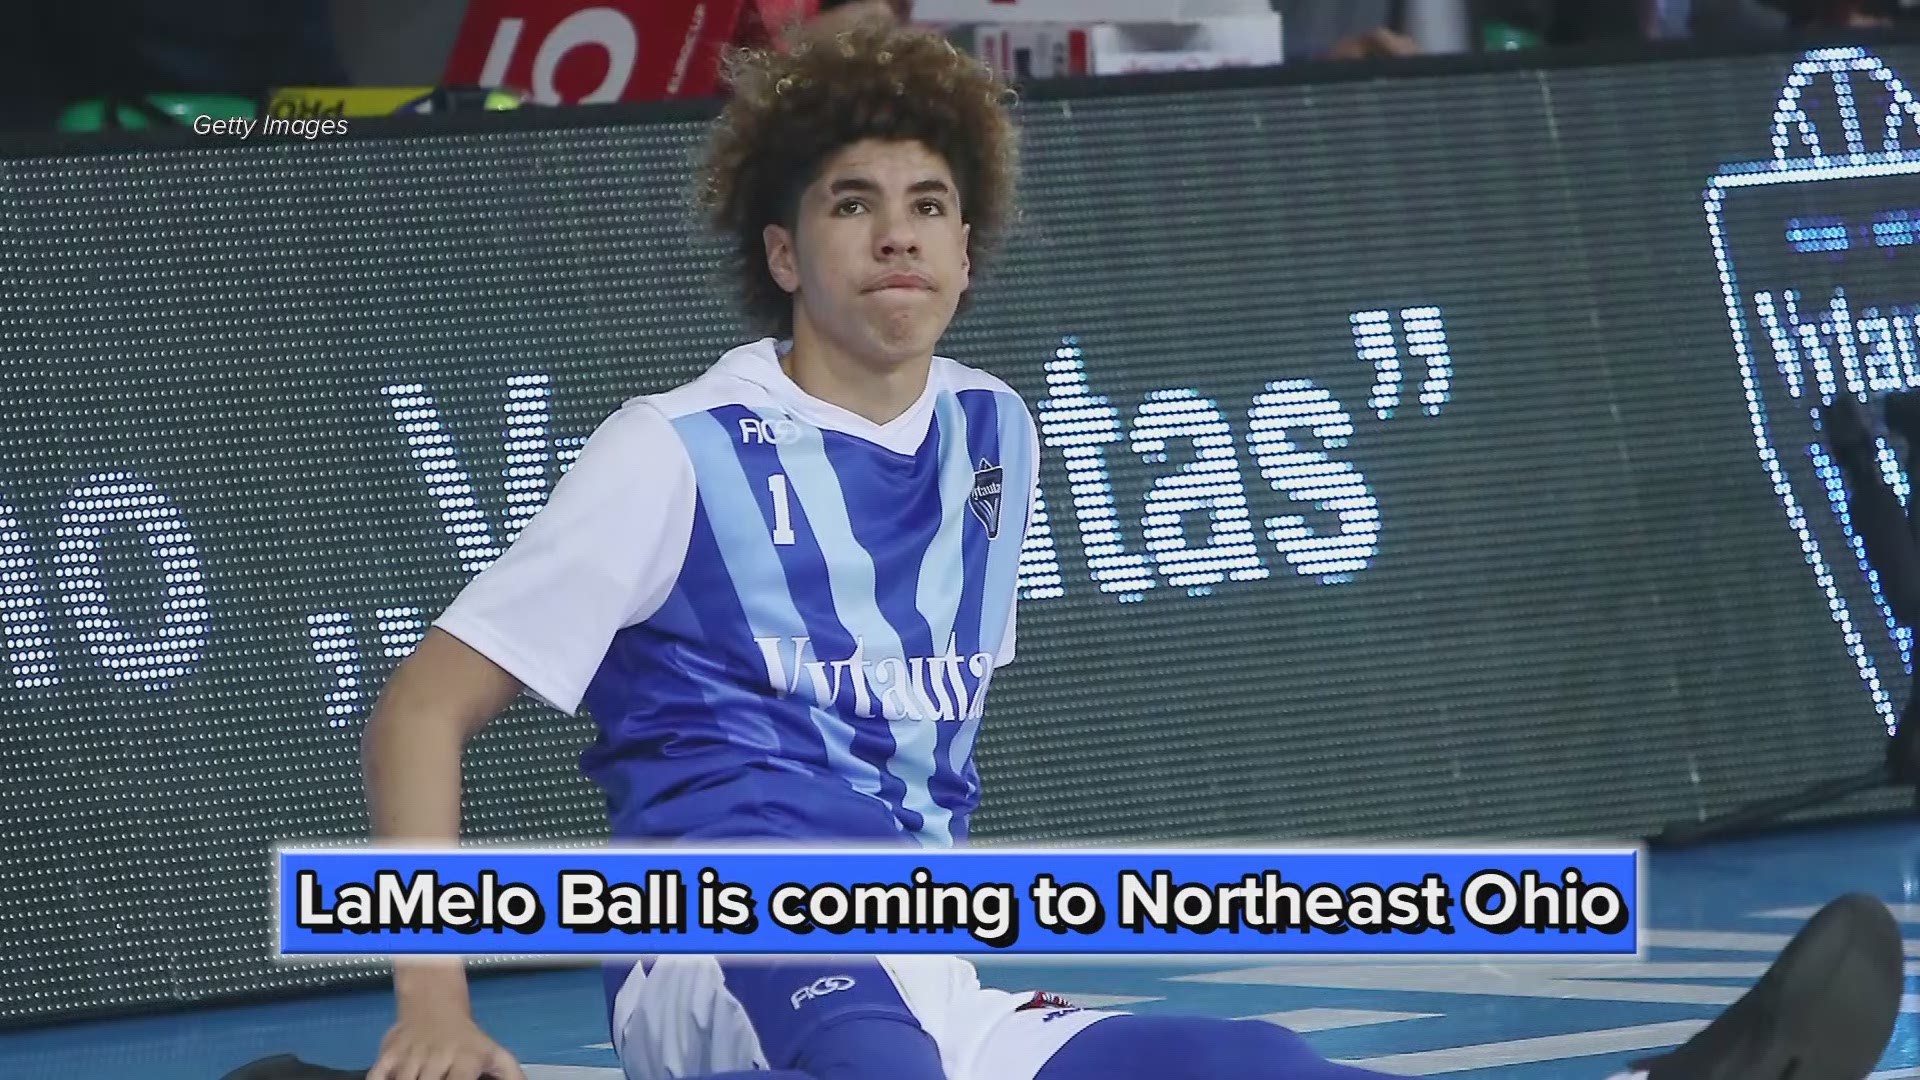 LaMelo Ball's new coach says he could be future No. 1 pick for Cleveland Cavaliers